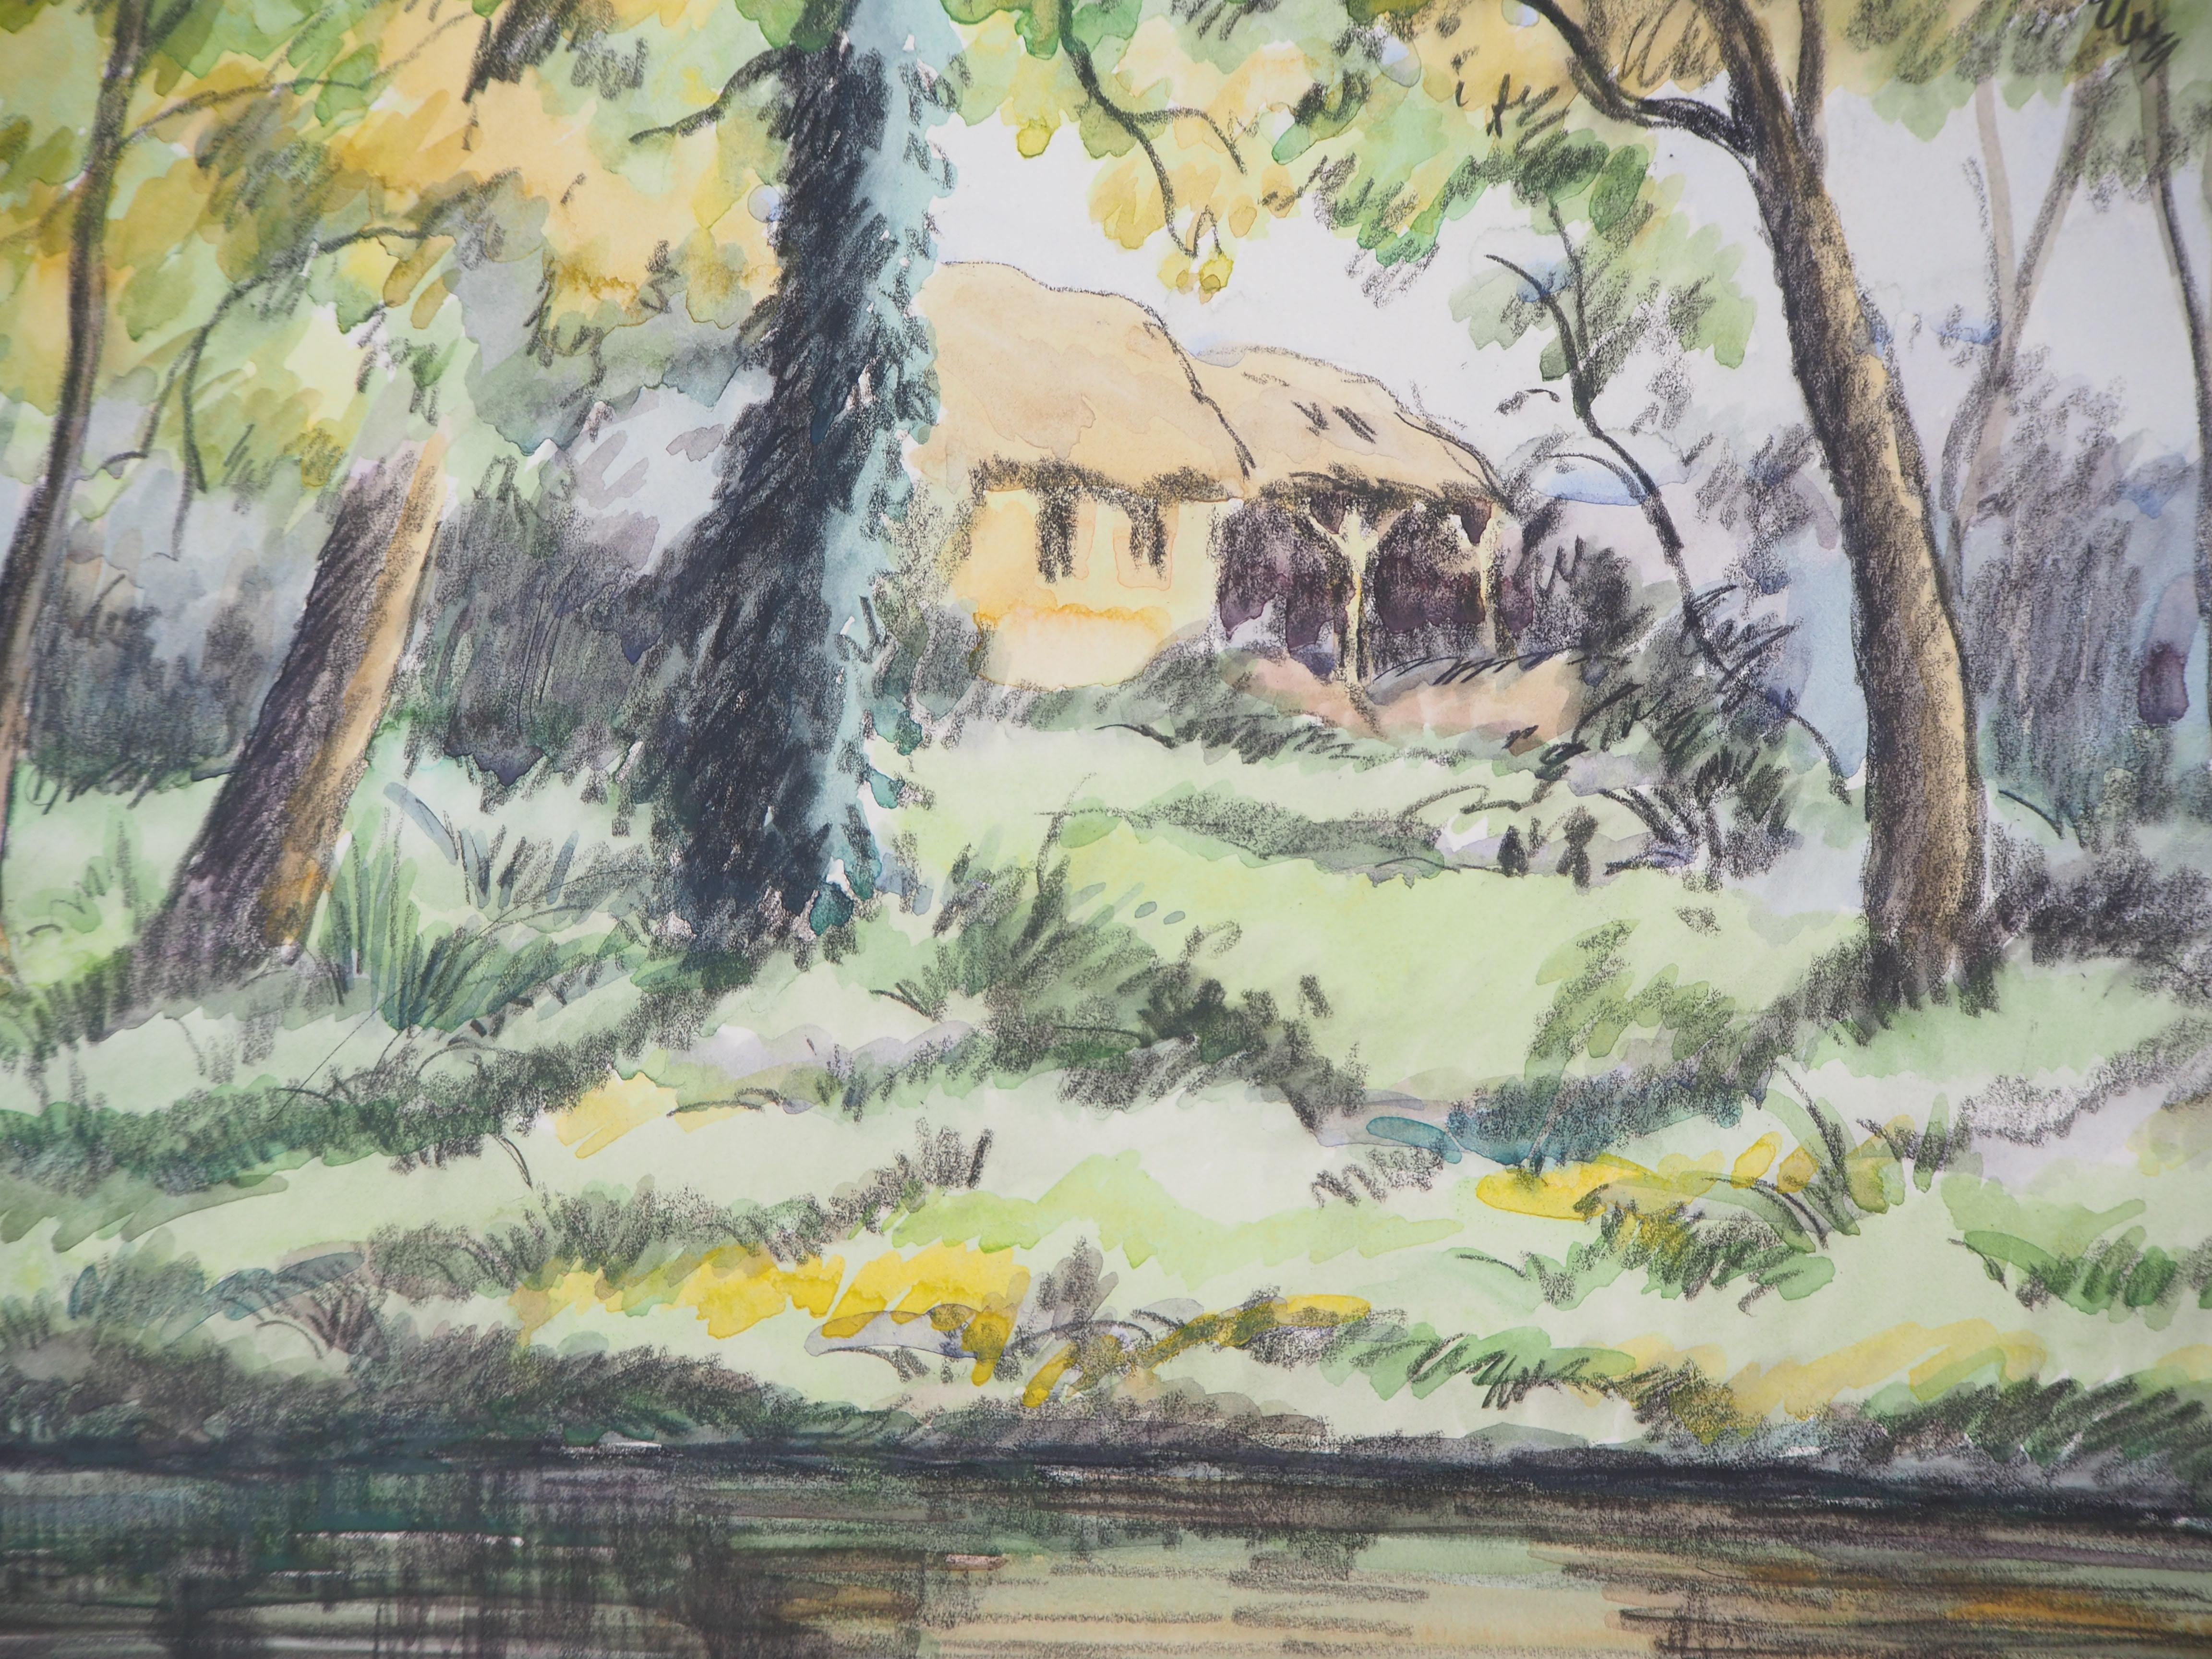 The Cottage in the Woods - Original watercolor painting - Signed - Impressionist Art by Paul Emile Pissarro